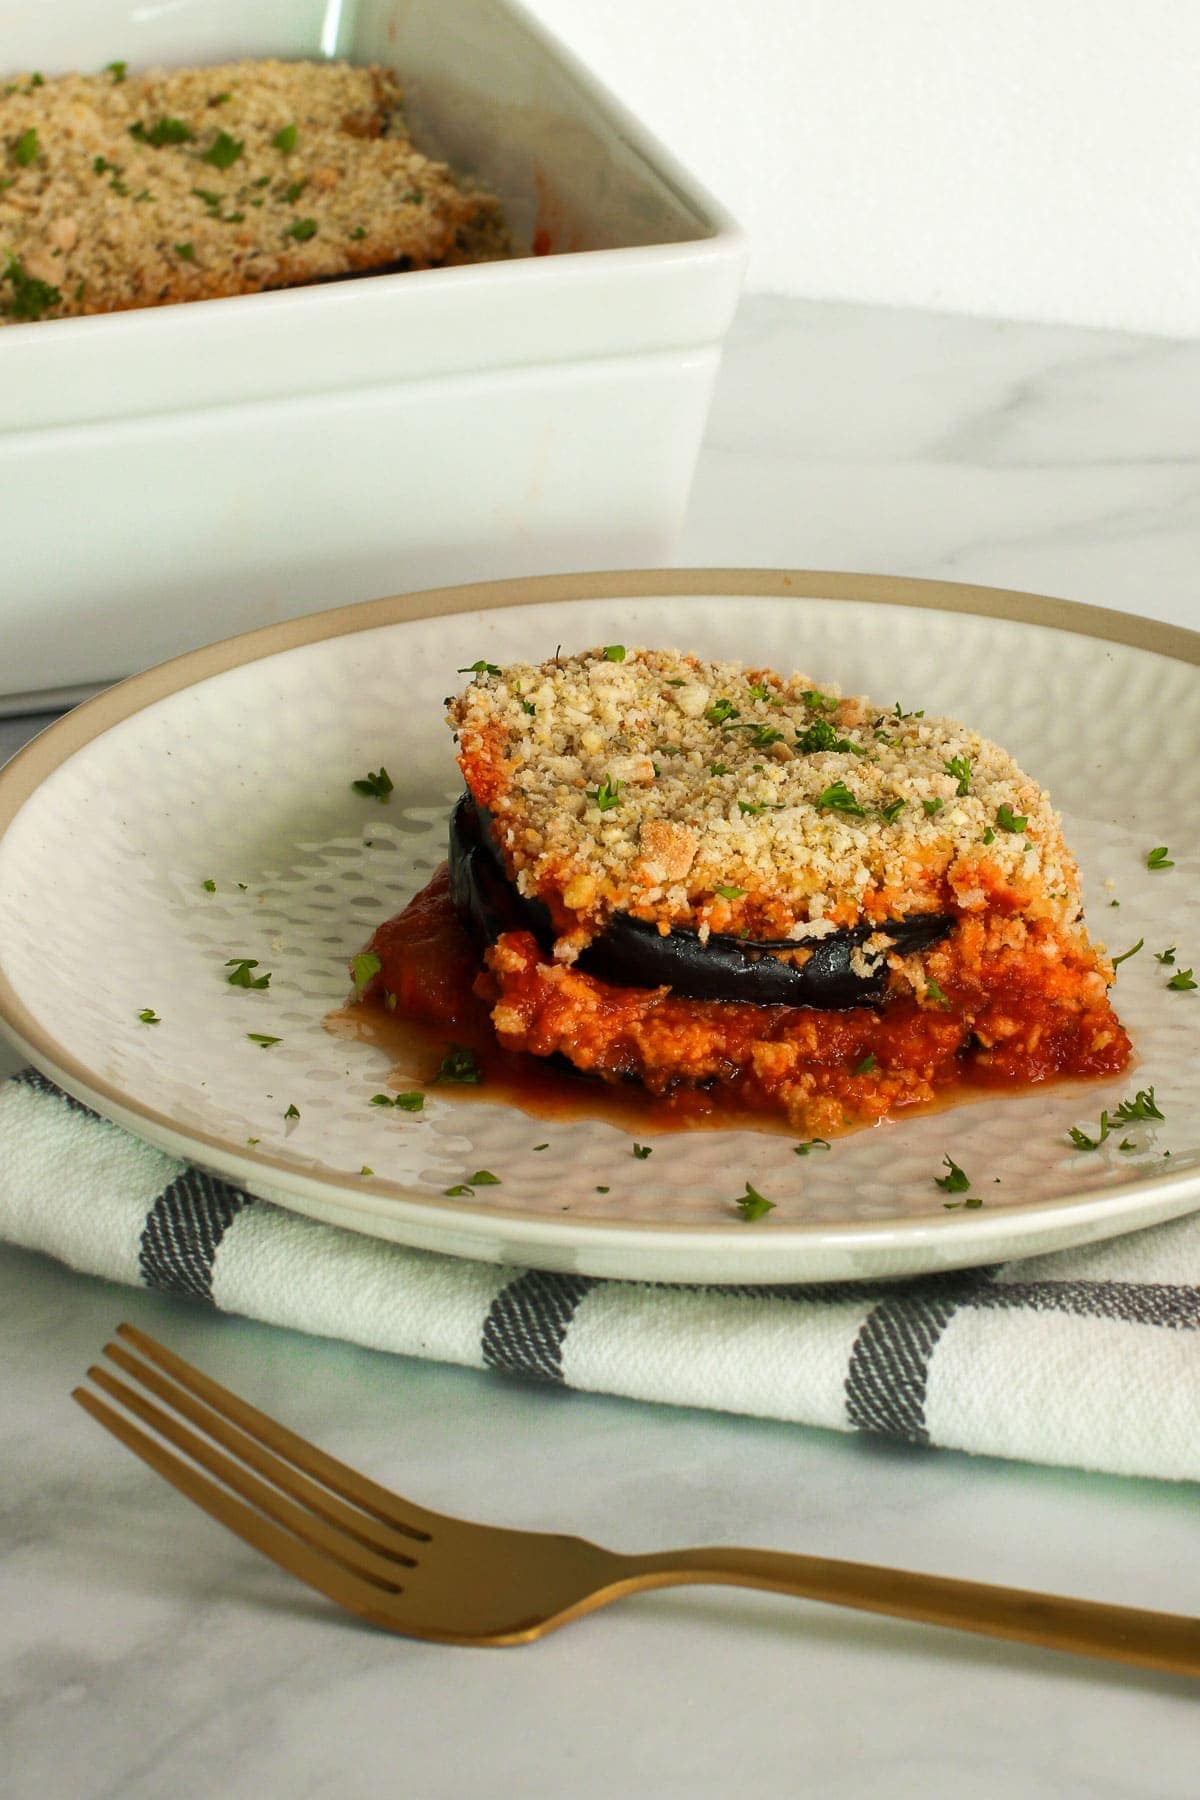 Vegan eggplant Parmesan slice on a white plate, with casserole dish in background. Gold fork, black plaid napkin.